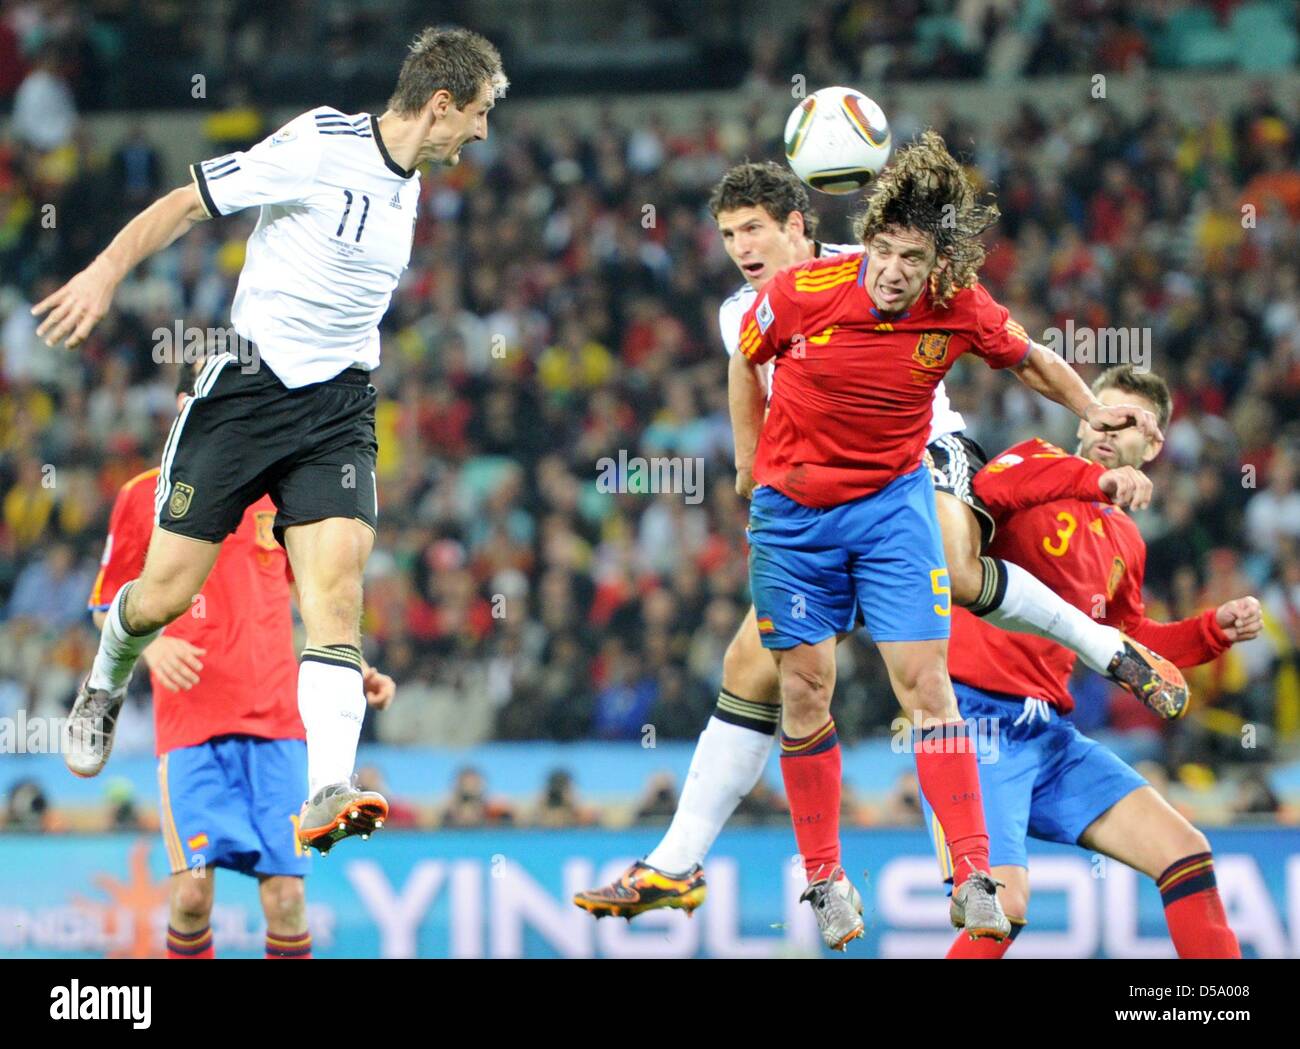 Miroslav Klose (L) of Germany vies with Carles Puyol (R) of Spain during the 2010 FIFA World Cup semi-final match between Germany and Spain at the Durban Stadium in Durban, South Africa 07 July 2010. Photo: Bernd Weissbrod dpa - Please refer to http://dpaq.de/FIFA-WM2010-TC Stock Photo